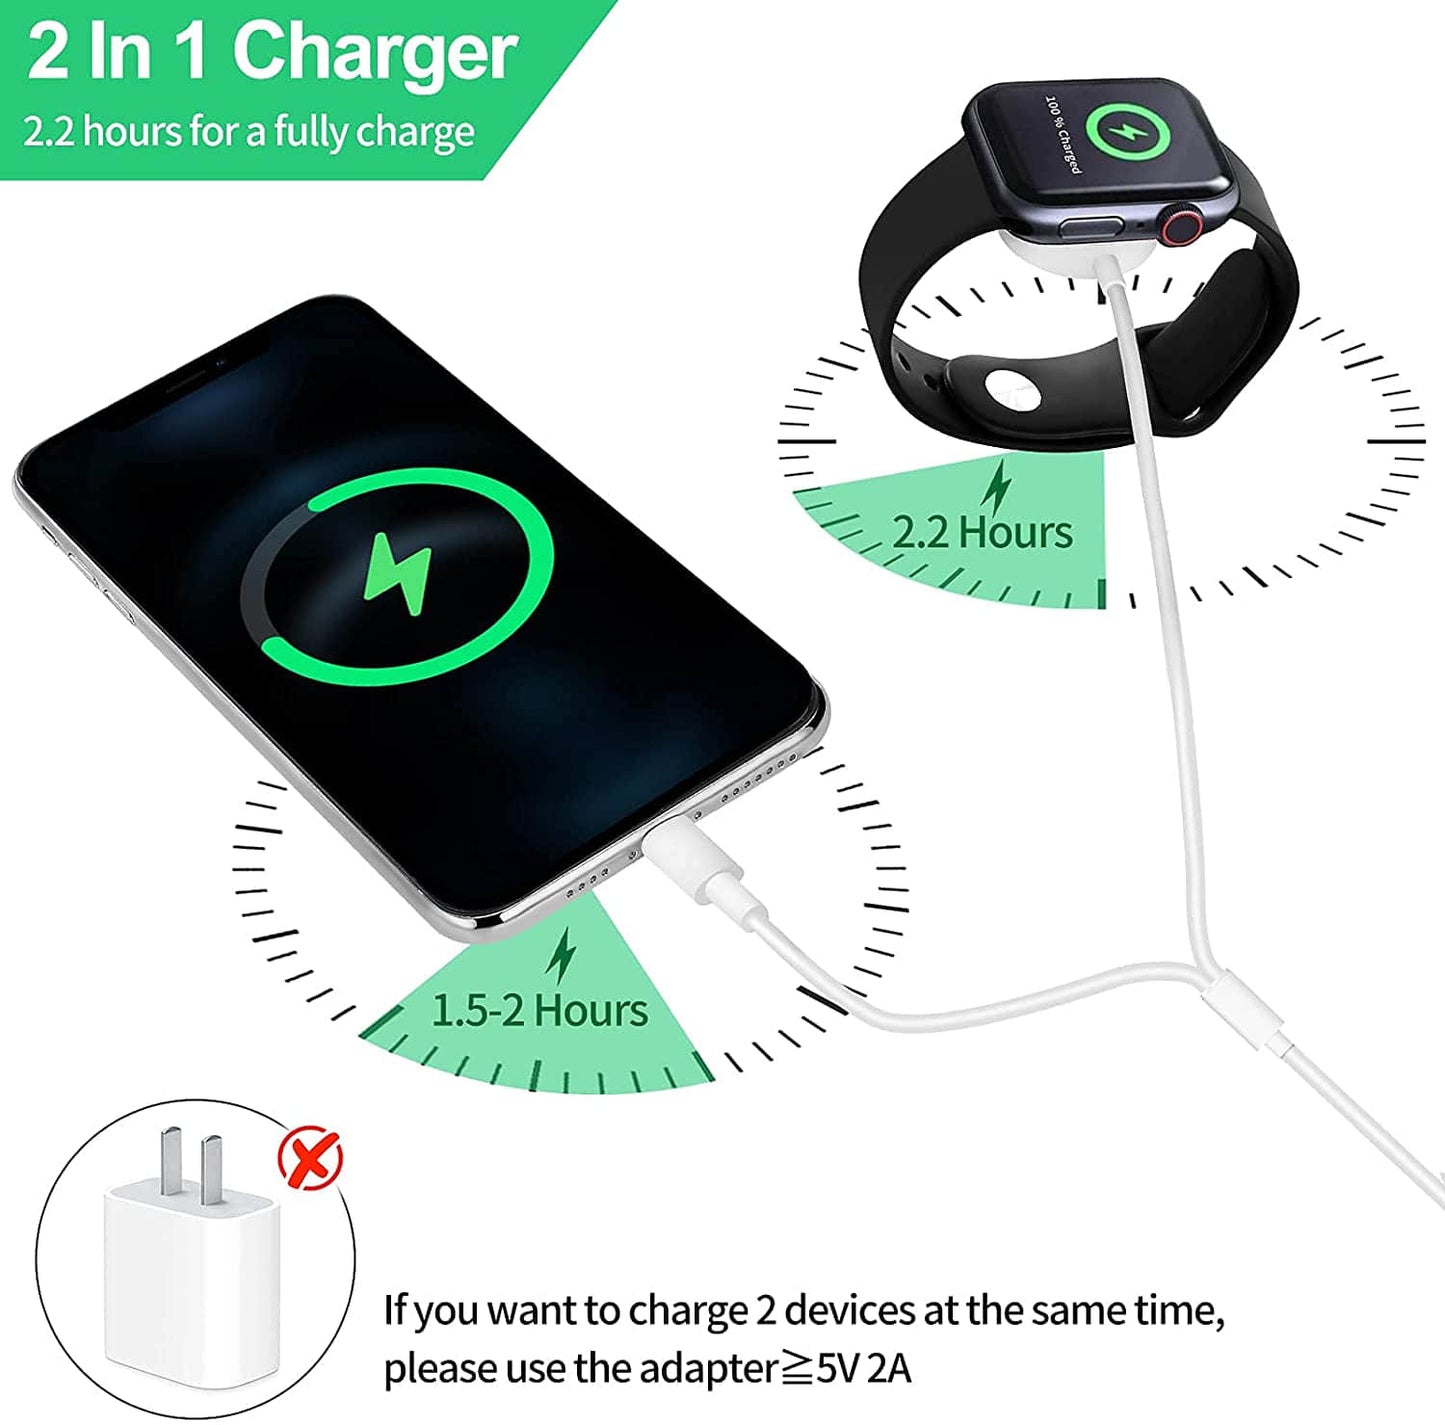 Charging Cable for iWatch, Phone & Pad Series, 2-in-1 Upgraded Version